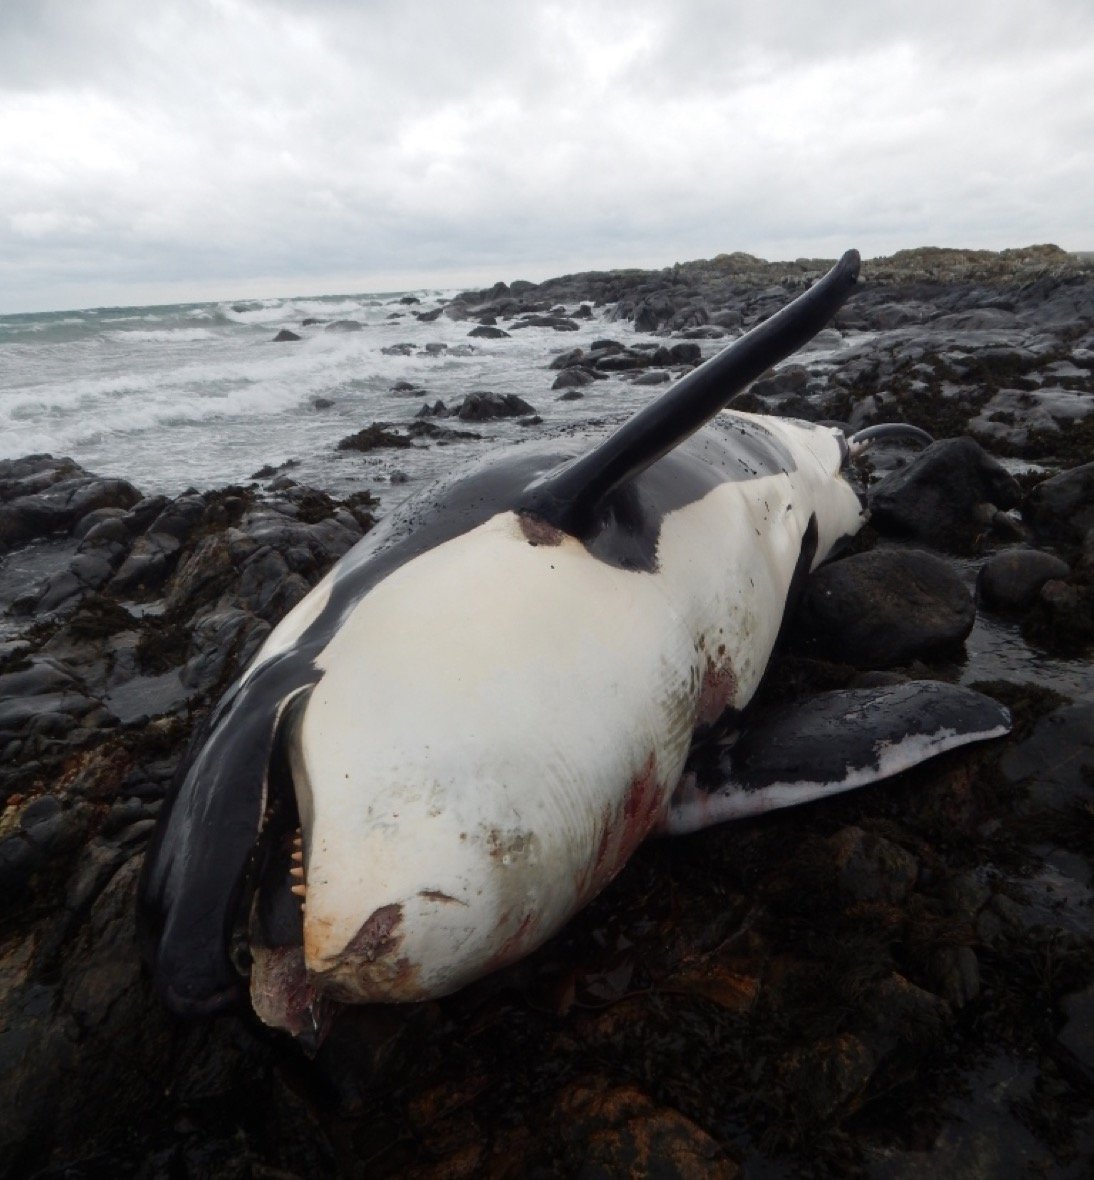 Dead killer whale found on Tiree